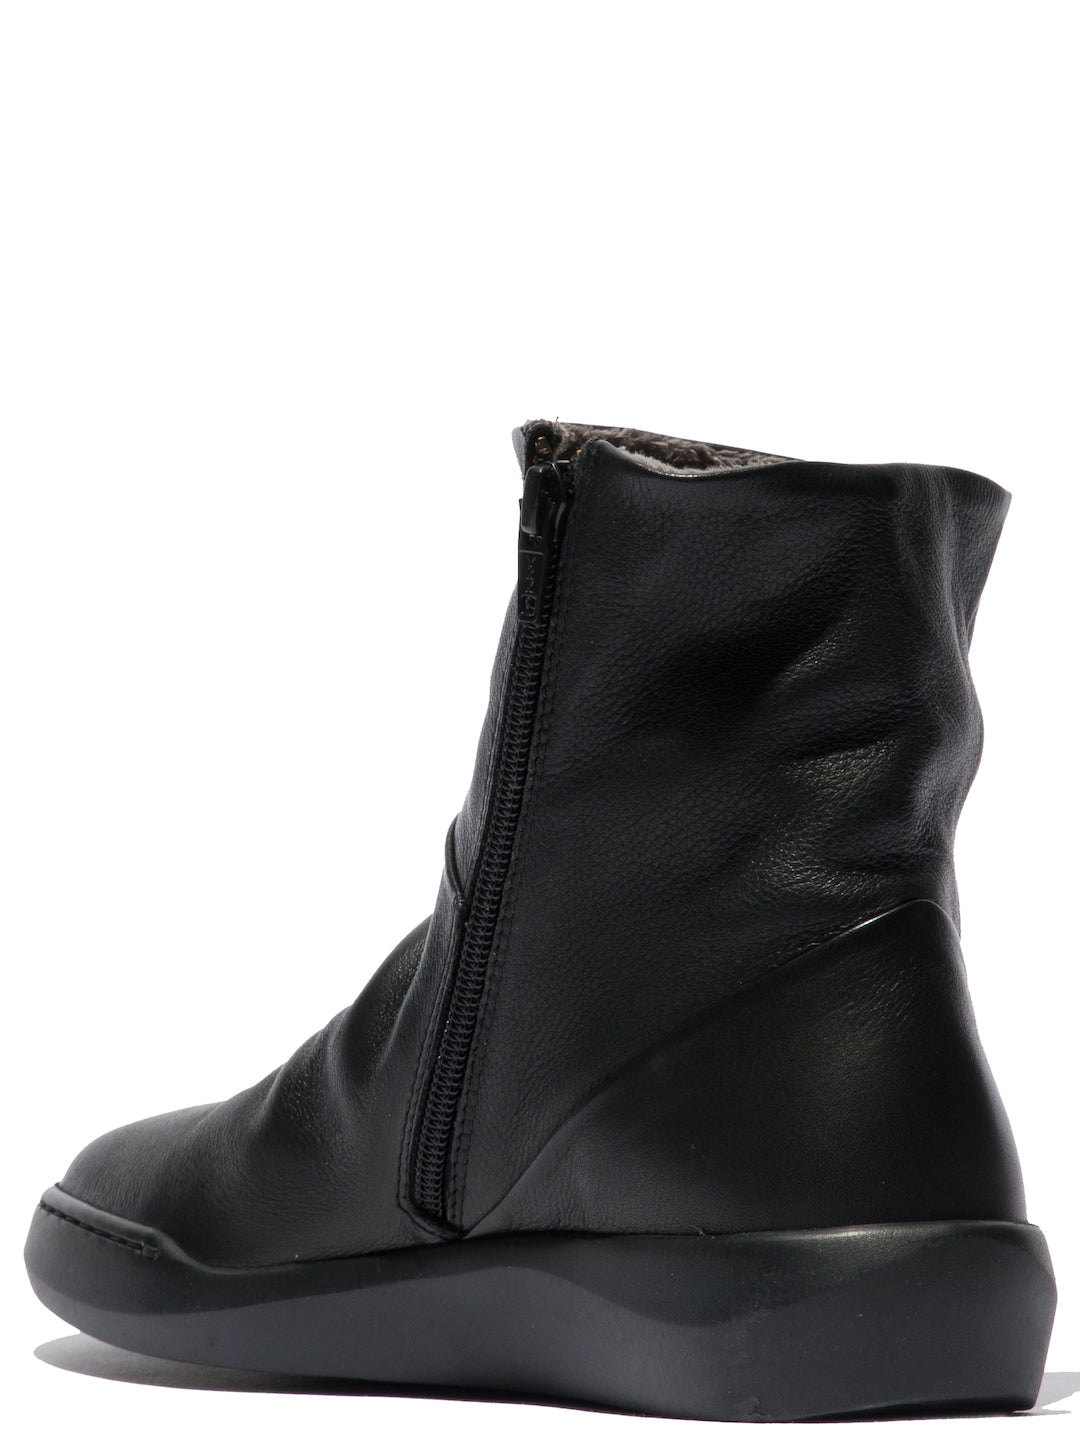 Softinos Bler 550 Ladies Black Leather Side Zip Ankle Boots